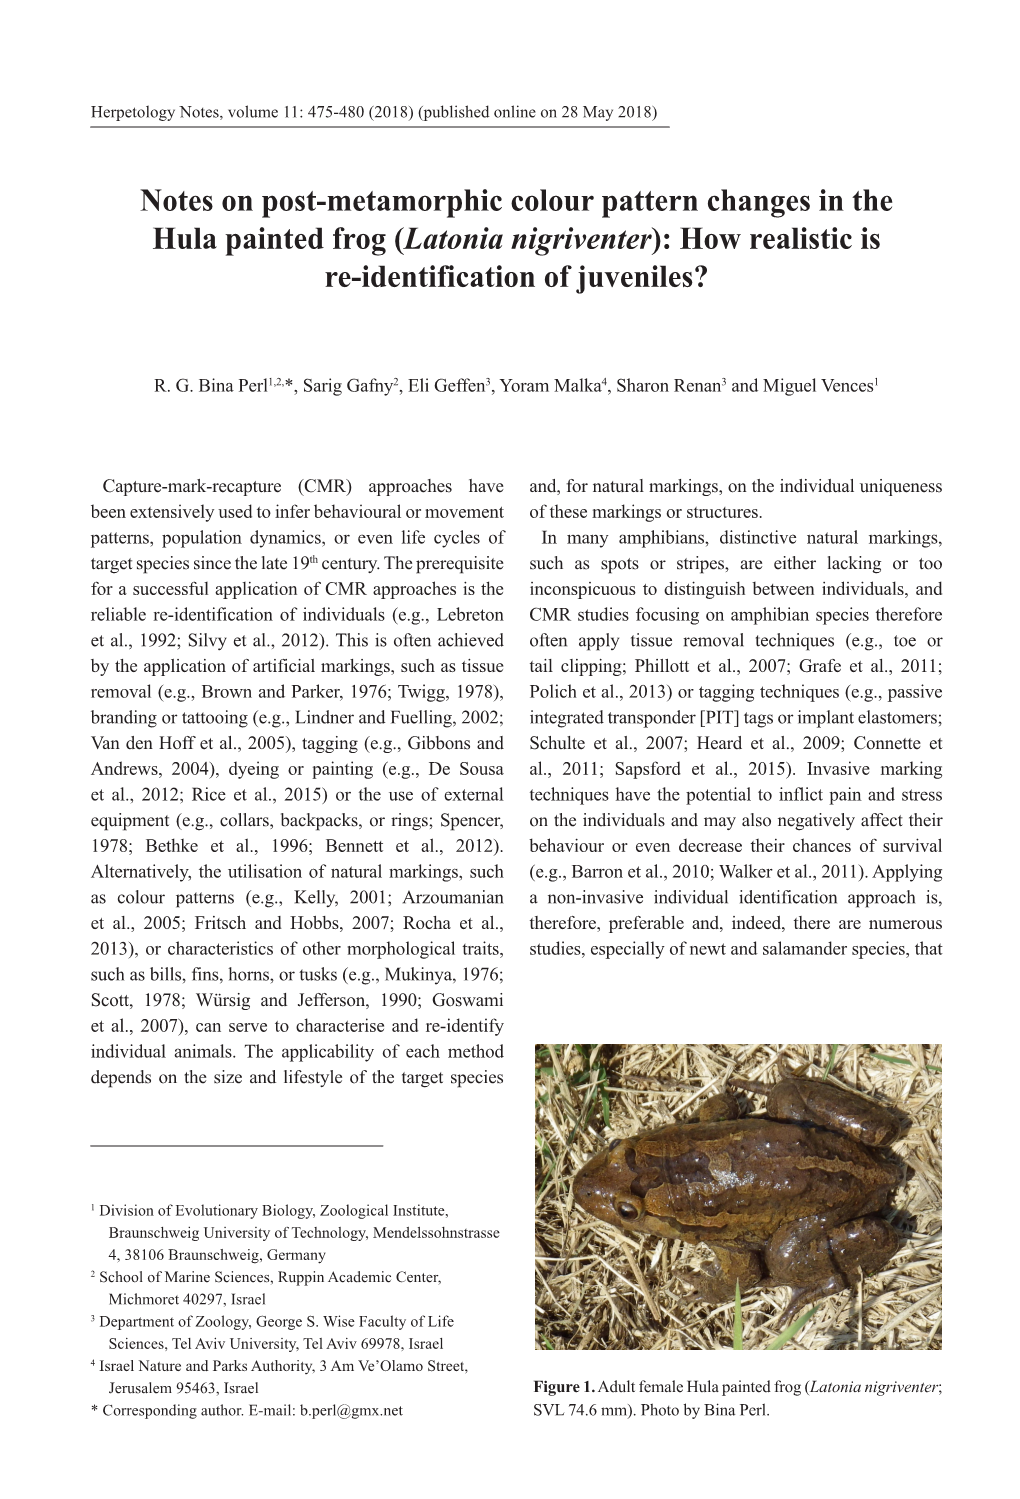 Notes on Post-Metamorphic Colour Pattern Changes in the Hula Painted Frog (Latonia Nigriventer): How Realistic Is Re-Identification of Juveniles?